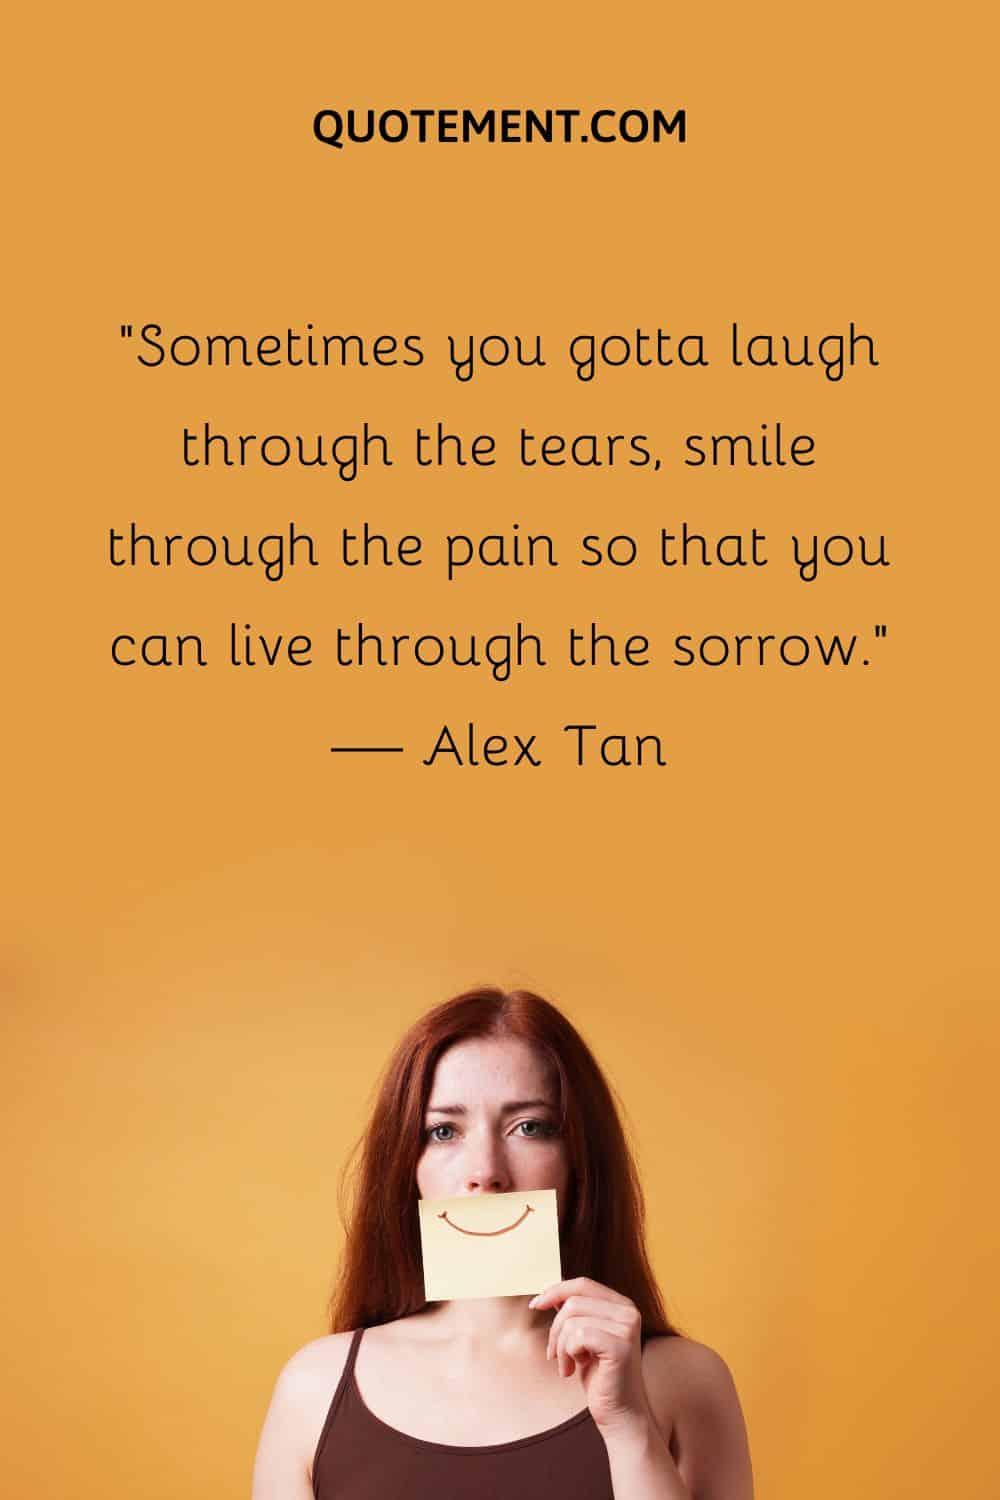 Sometimes you gotta laugh through the tears, smile through the pain so that you can live through the sorrow.